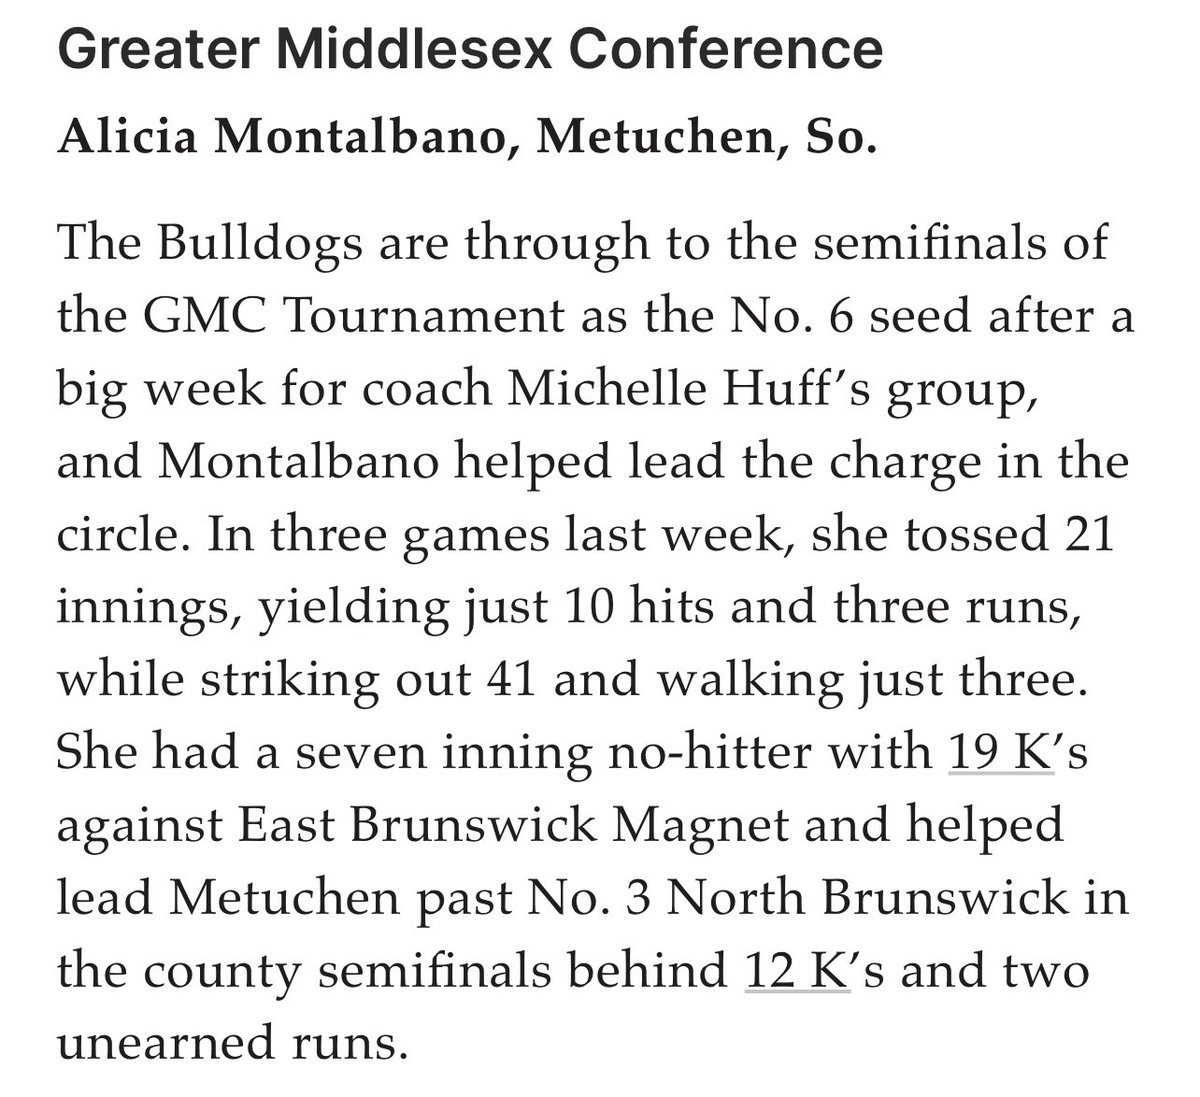 Greater Middlesex Conference Alicia Montalbano, Metuchen, So. “The Bulldogs are through to the semifinals of the GMC Tournament as the No. 6 seed after a big wk for coach Michelle Huff’s group & Montalbano helped lead the charge in the circle..” LET’S GO!! @Alicia_Softball 🙌🐾